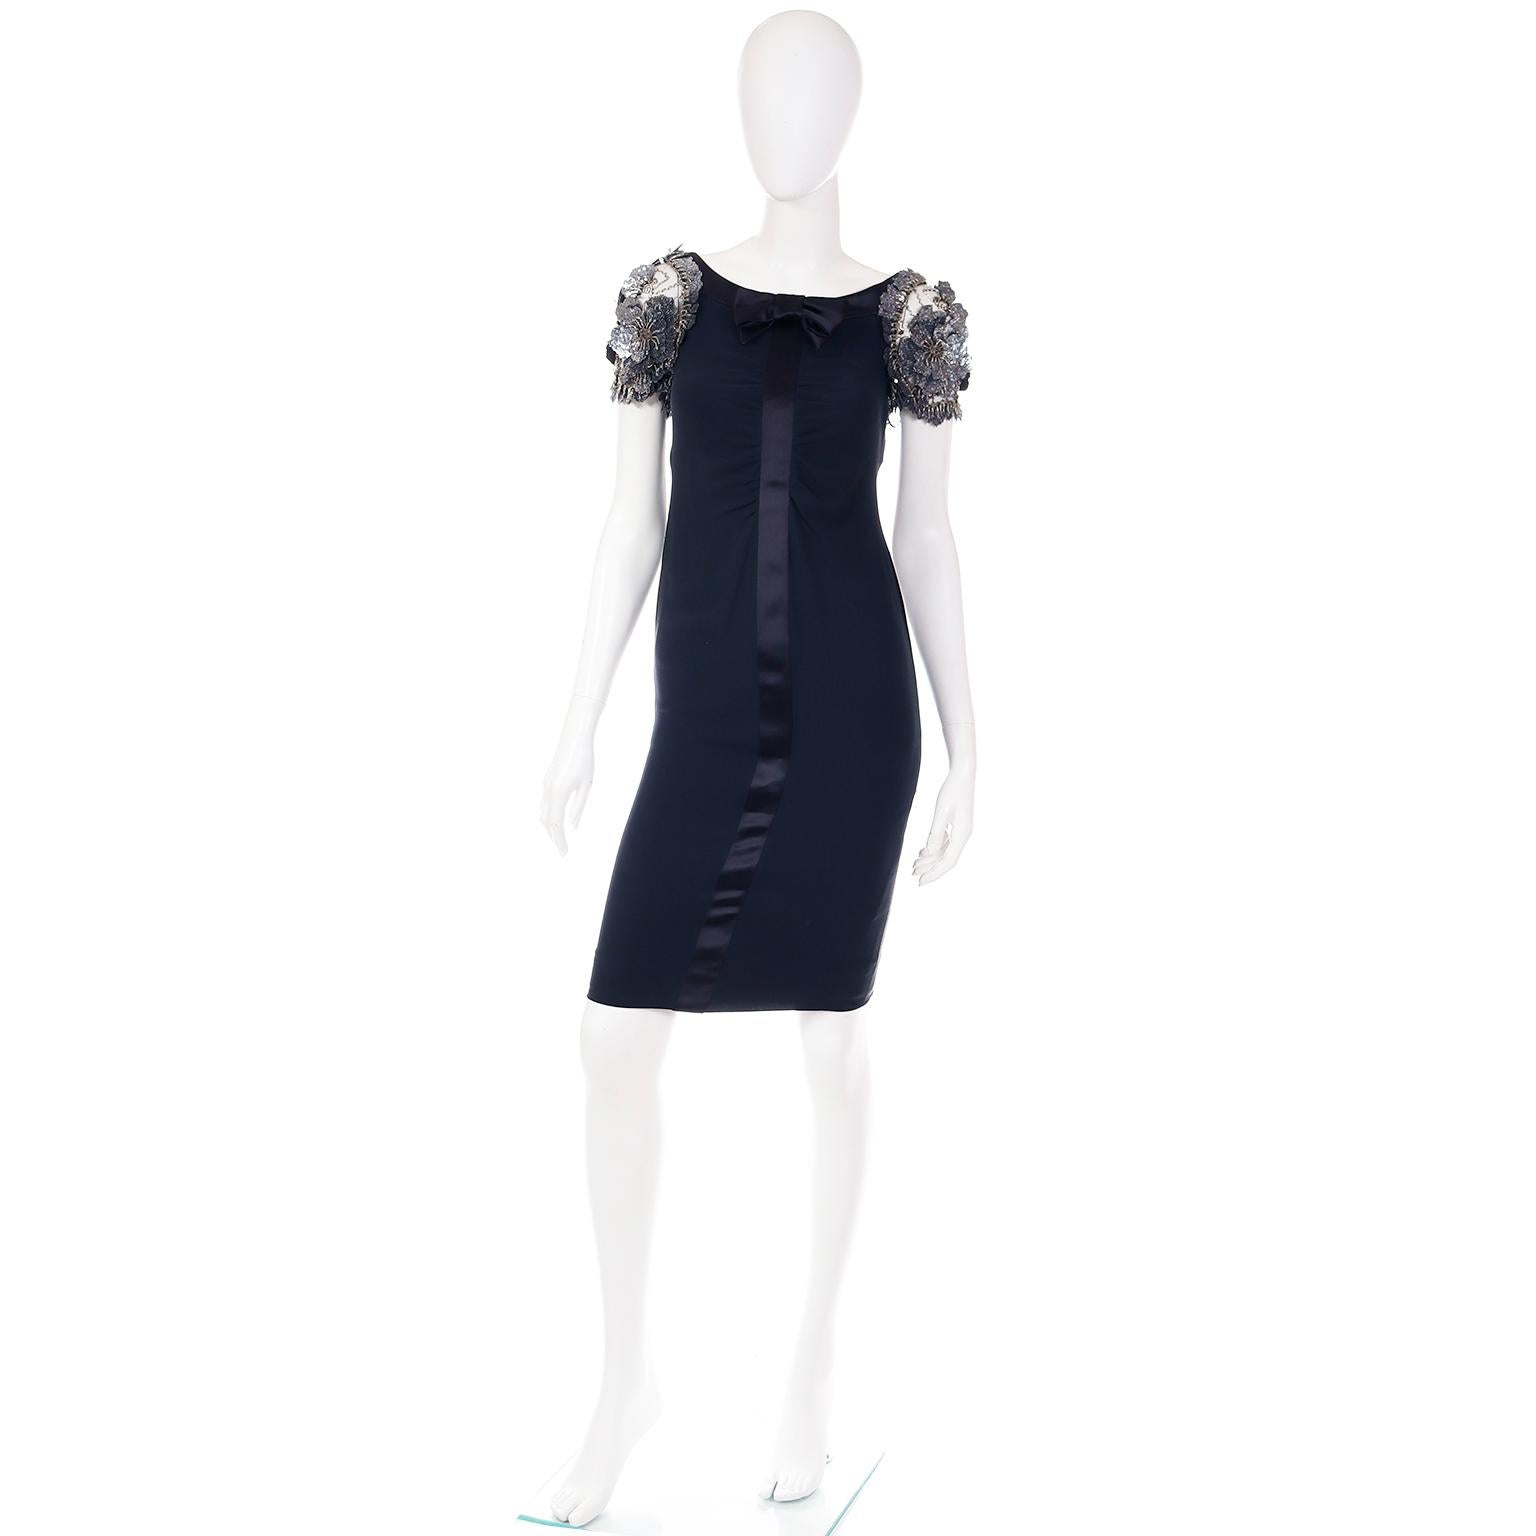 We love Valentino dresses and this one is exceptional. This outstanding dark, midnight blue silk crepe evening dress is actually sleeveless but it has stiffened net cap applique floral sleeves that are entirely beaded. We have a coat from the